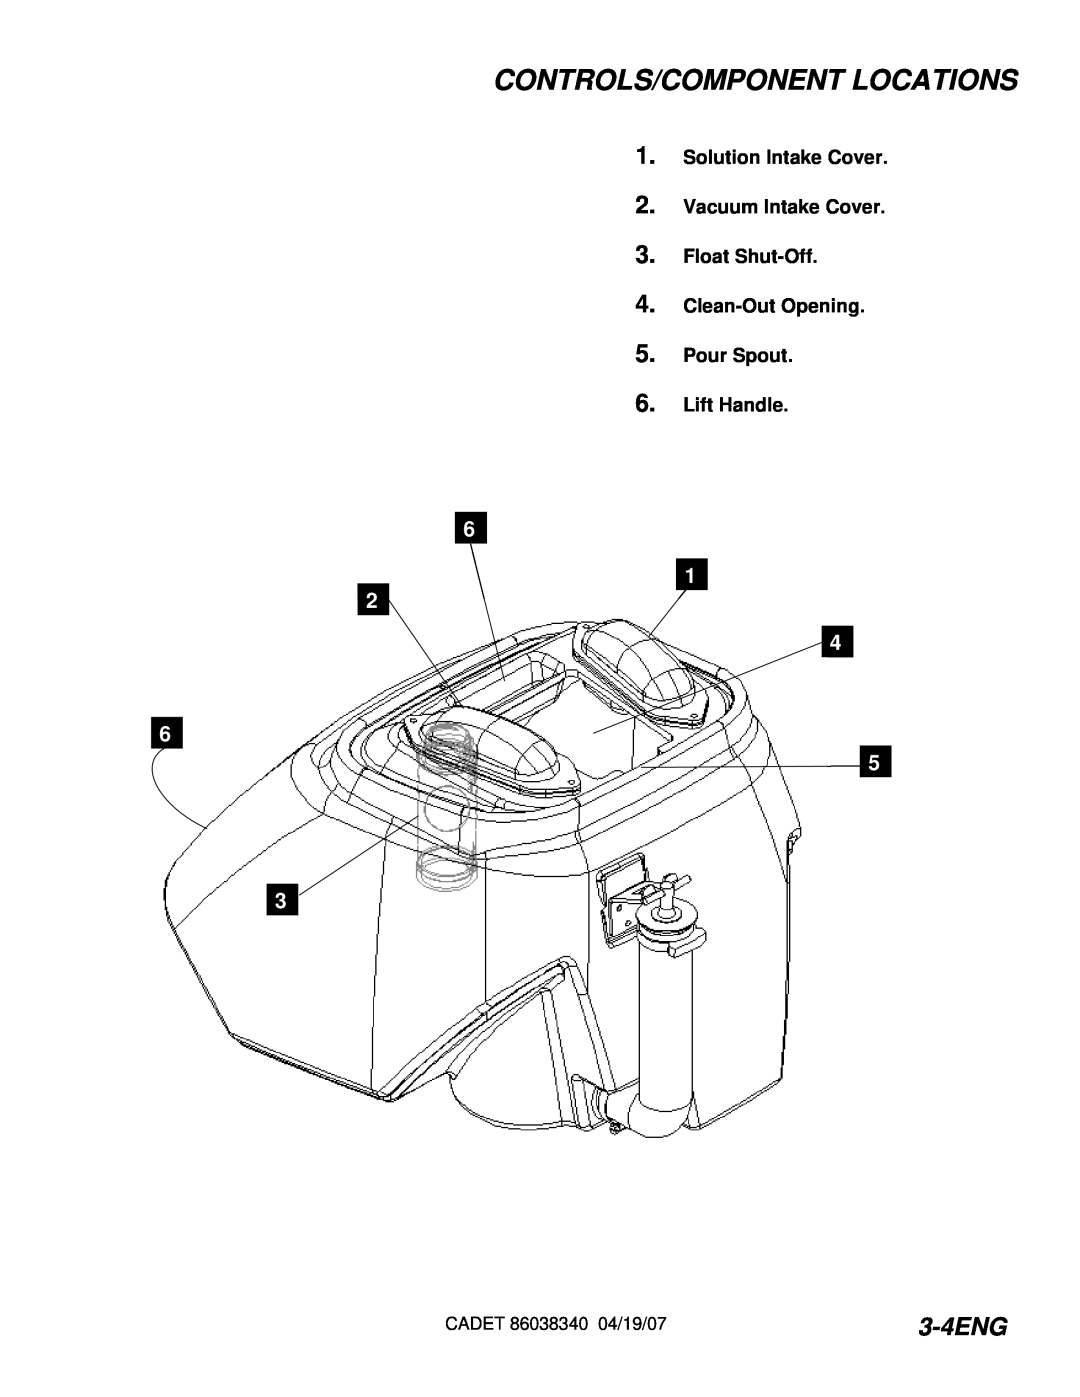 Windsor CDT7IE/10080070 3-4ENG, Controls/Component Locations, Solution Intake Cover 2.Vacuum Intake Cover, Lift Handle 